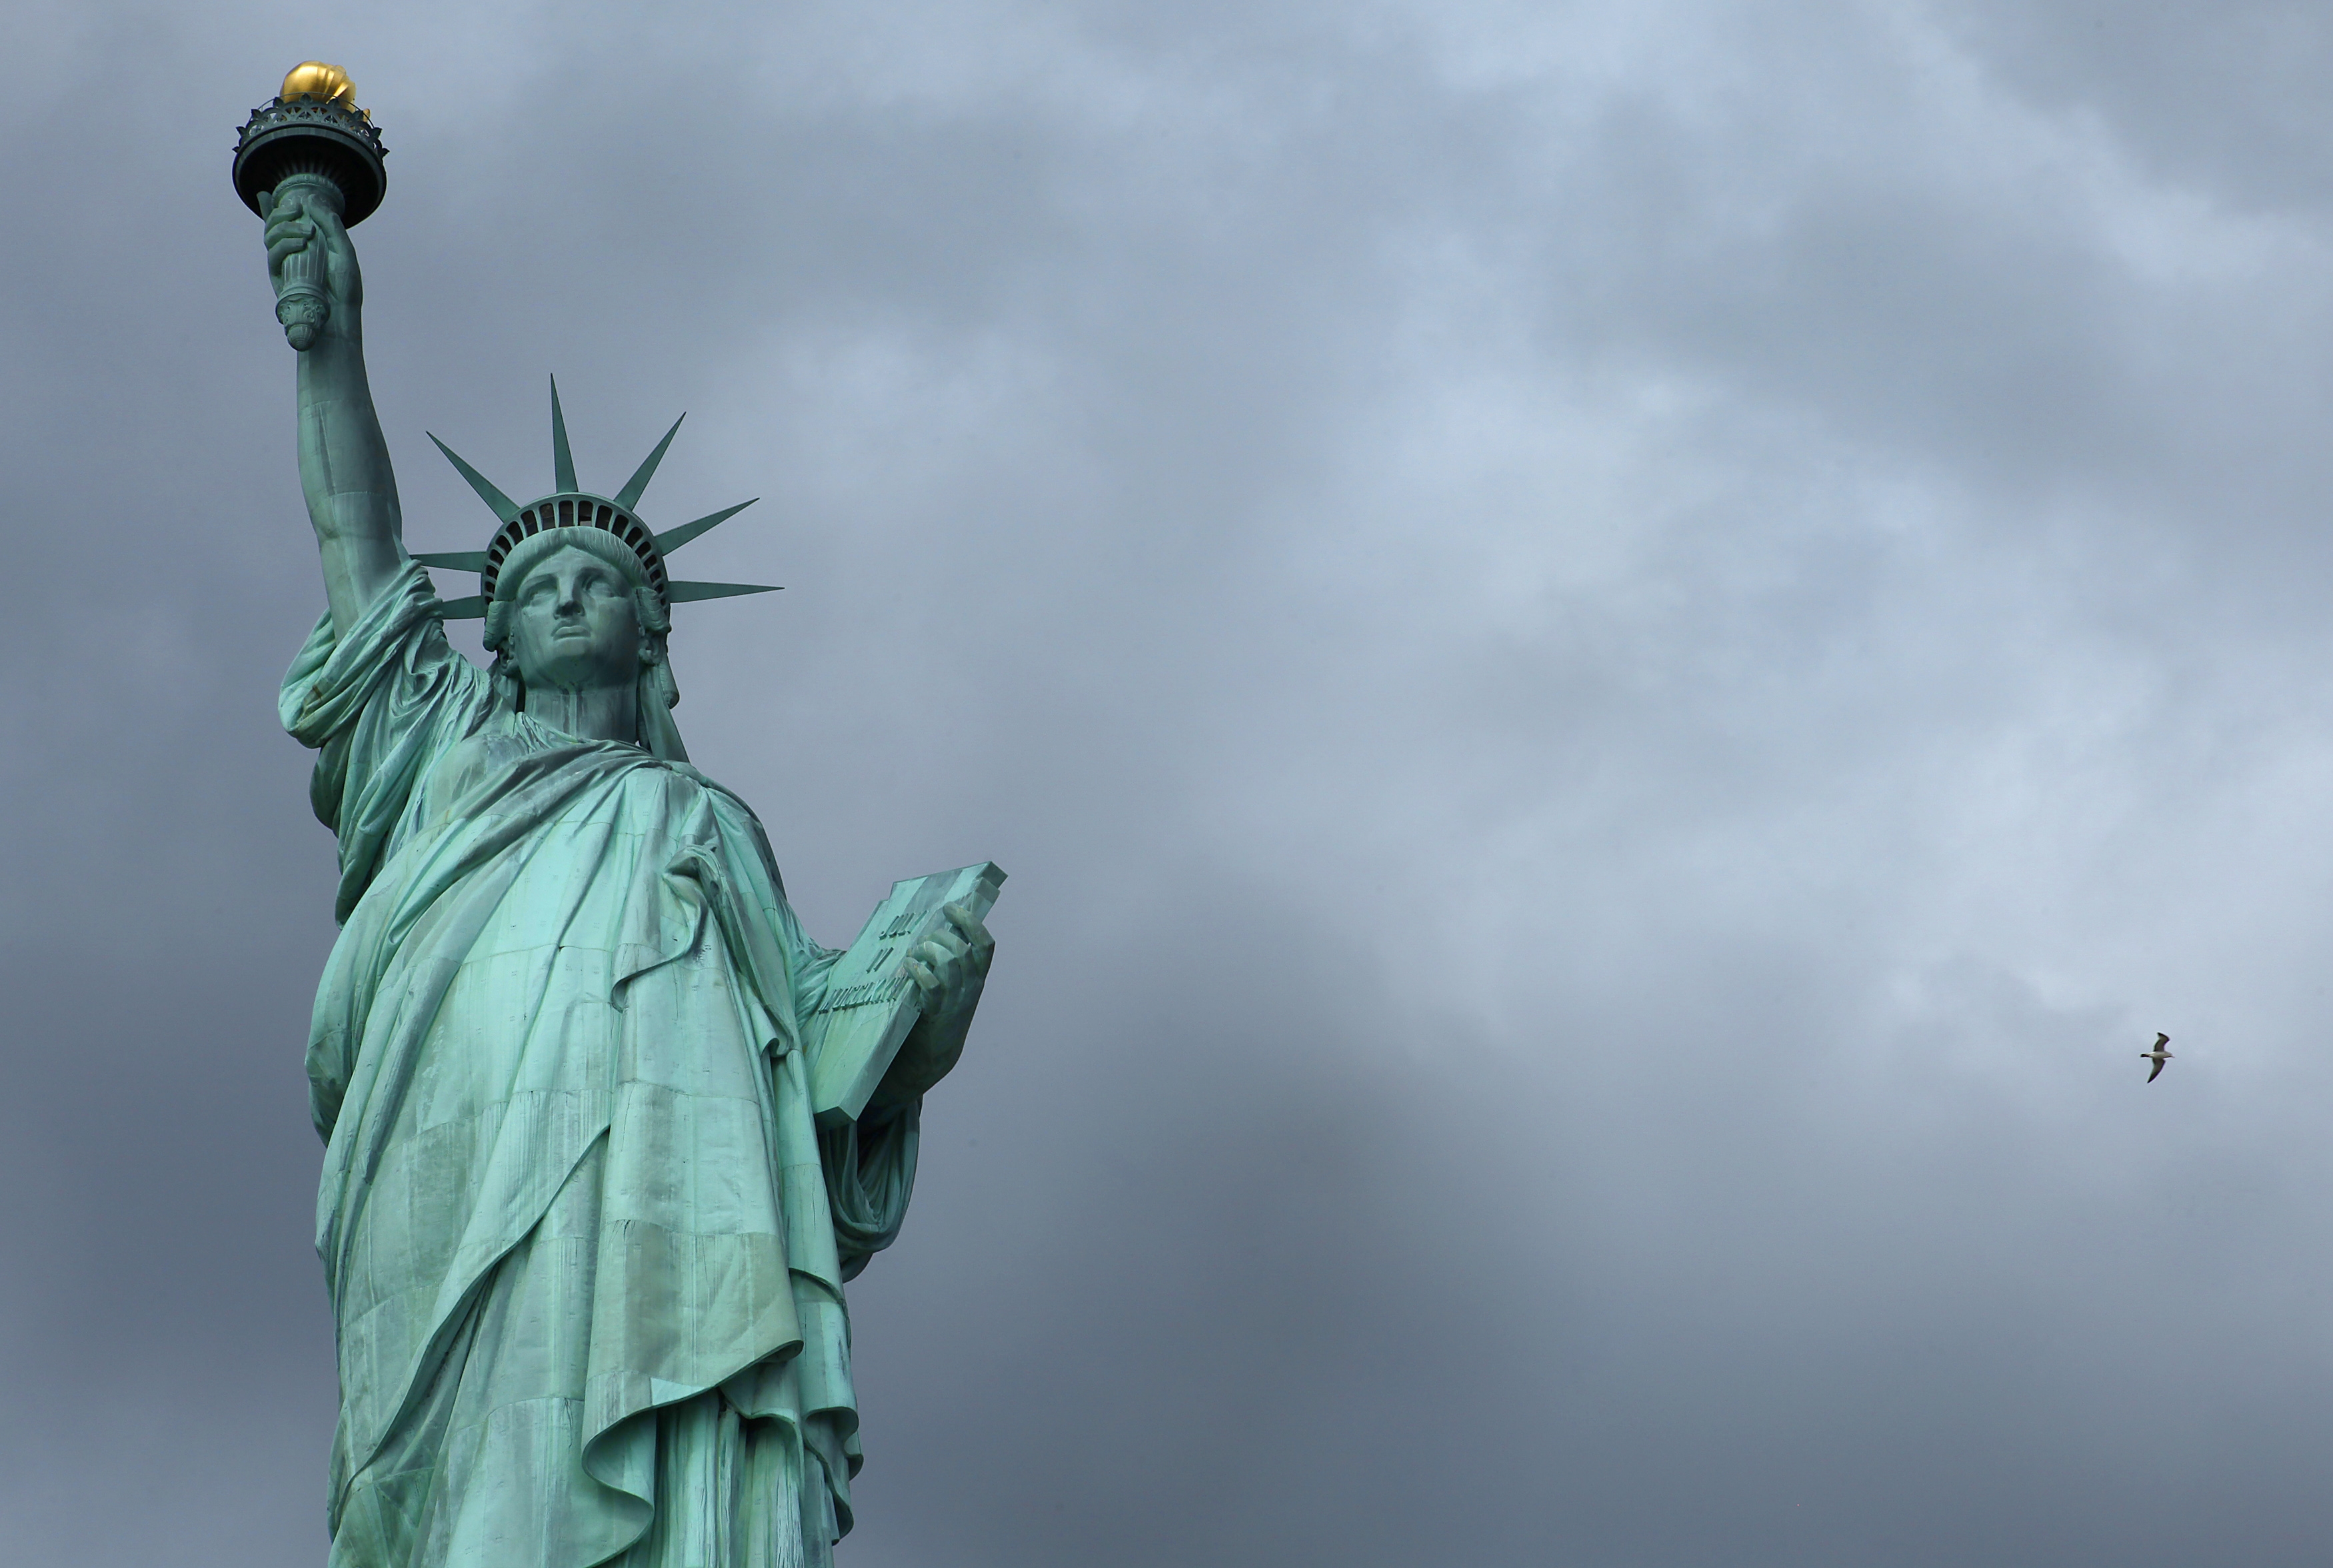 Citizenship, Values and Cultural Concerns: What Americans Want From Immigration Reform